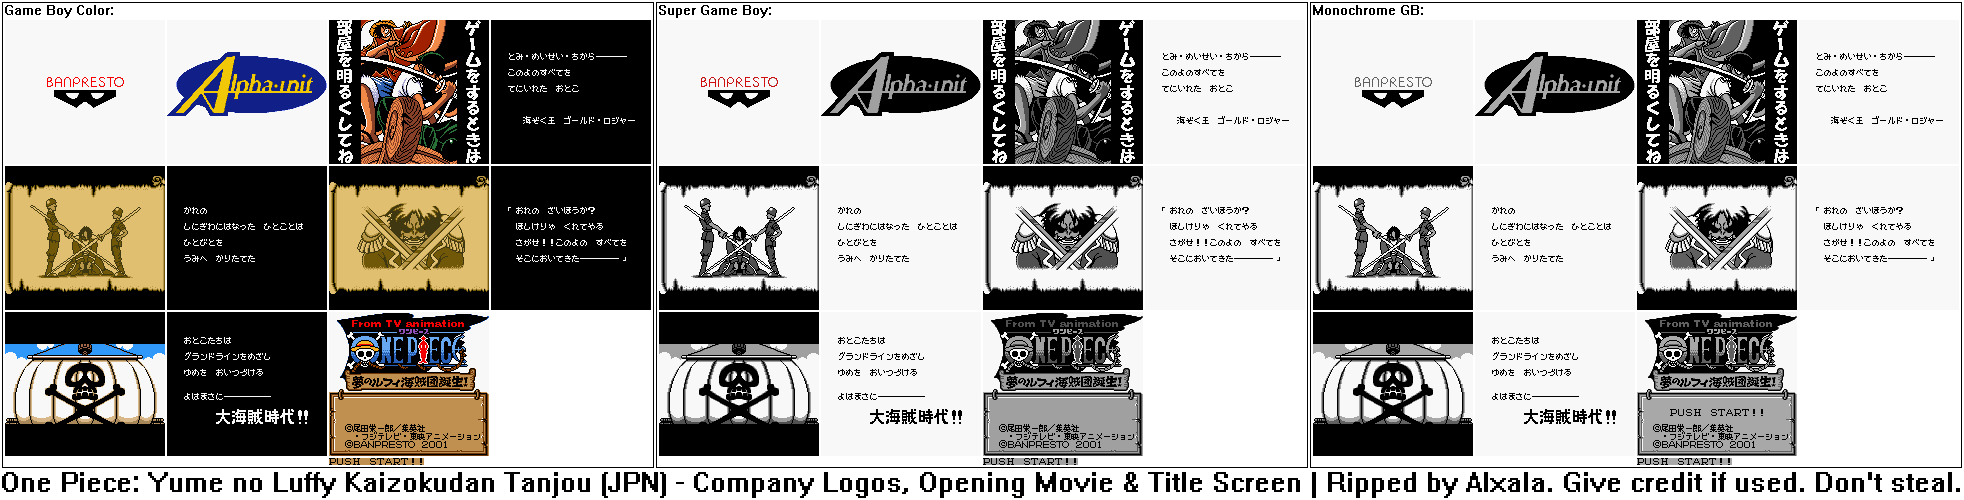 Company Logos, Opening Movie & Title Screen